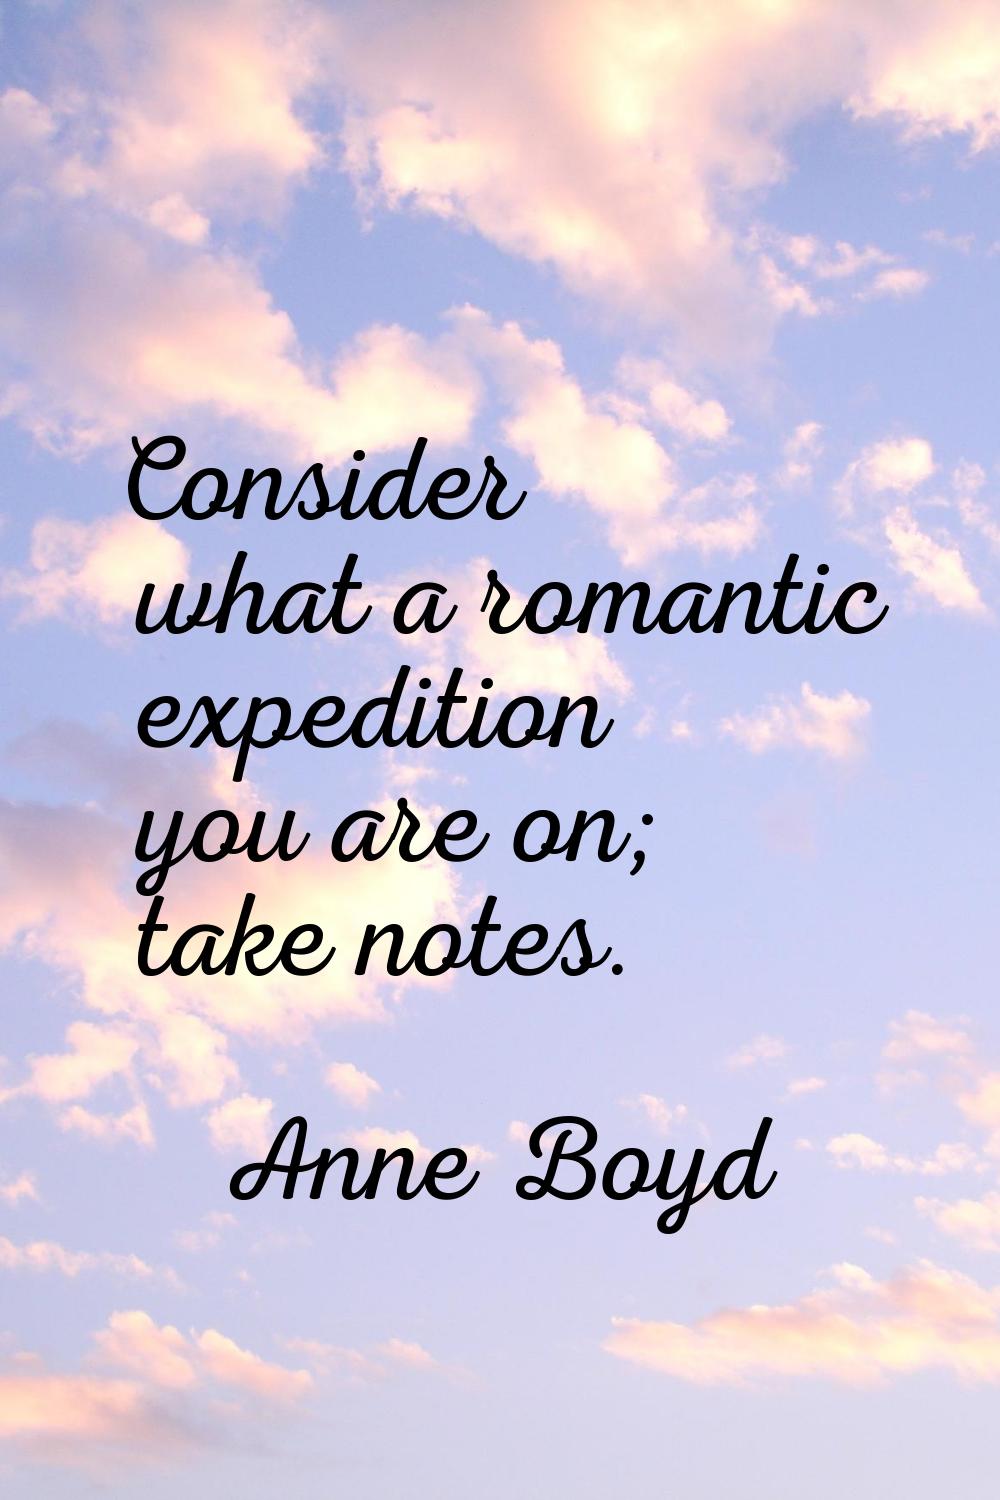 Consider what a romantic expedition you are on; take notes.